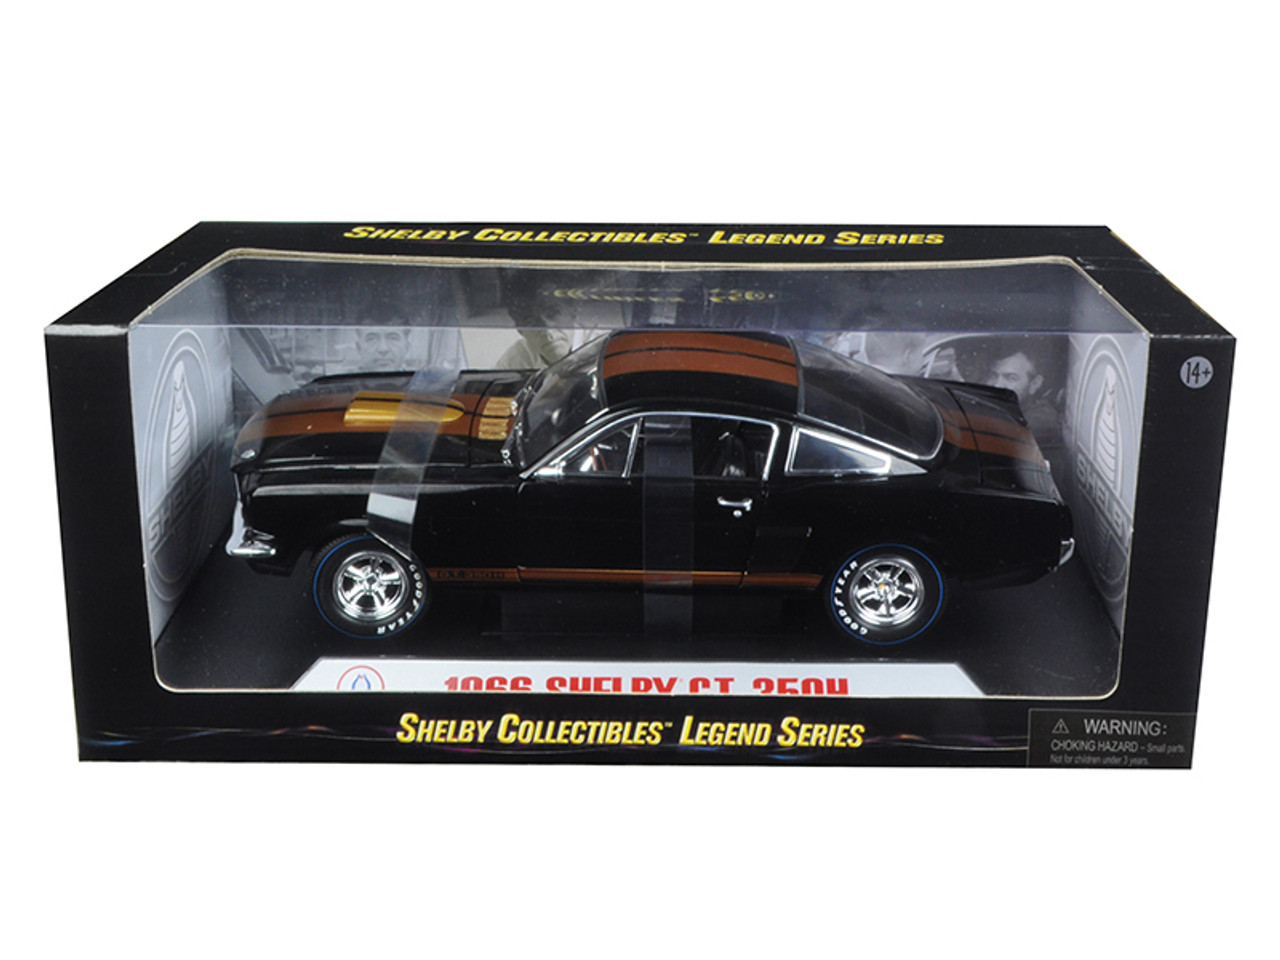 1/18 Shelby Collectibles 1966 Ford Mustang Shelby GT350H "Hertz" Black with Gold Stripes Diecast Car Model